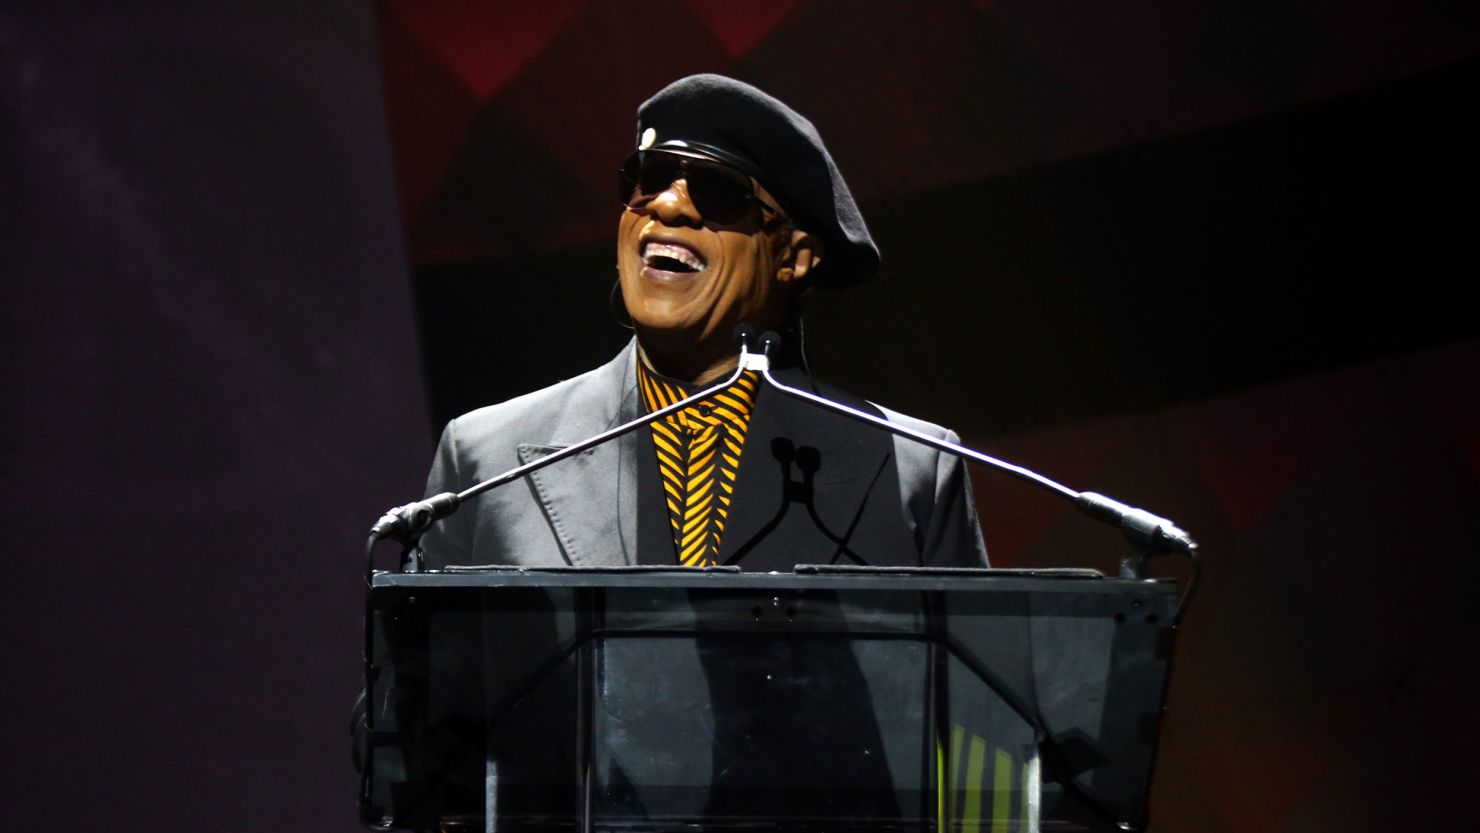 Stevie Wonder accepts the Icon Award onstage during the National Equal Justice Awards Dinner on Tuesday.